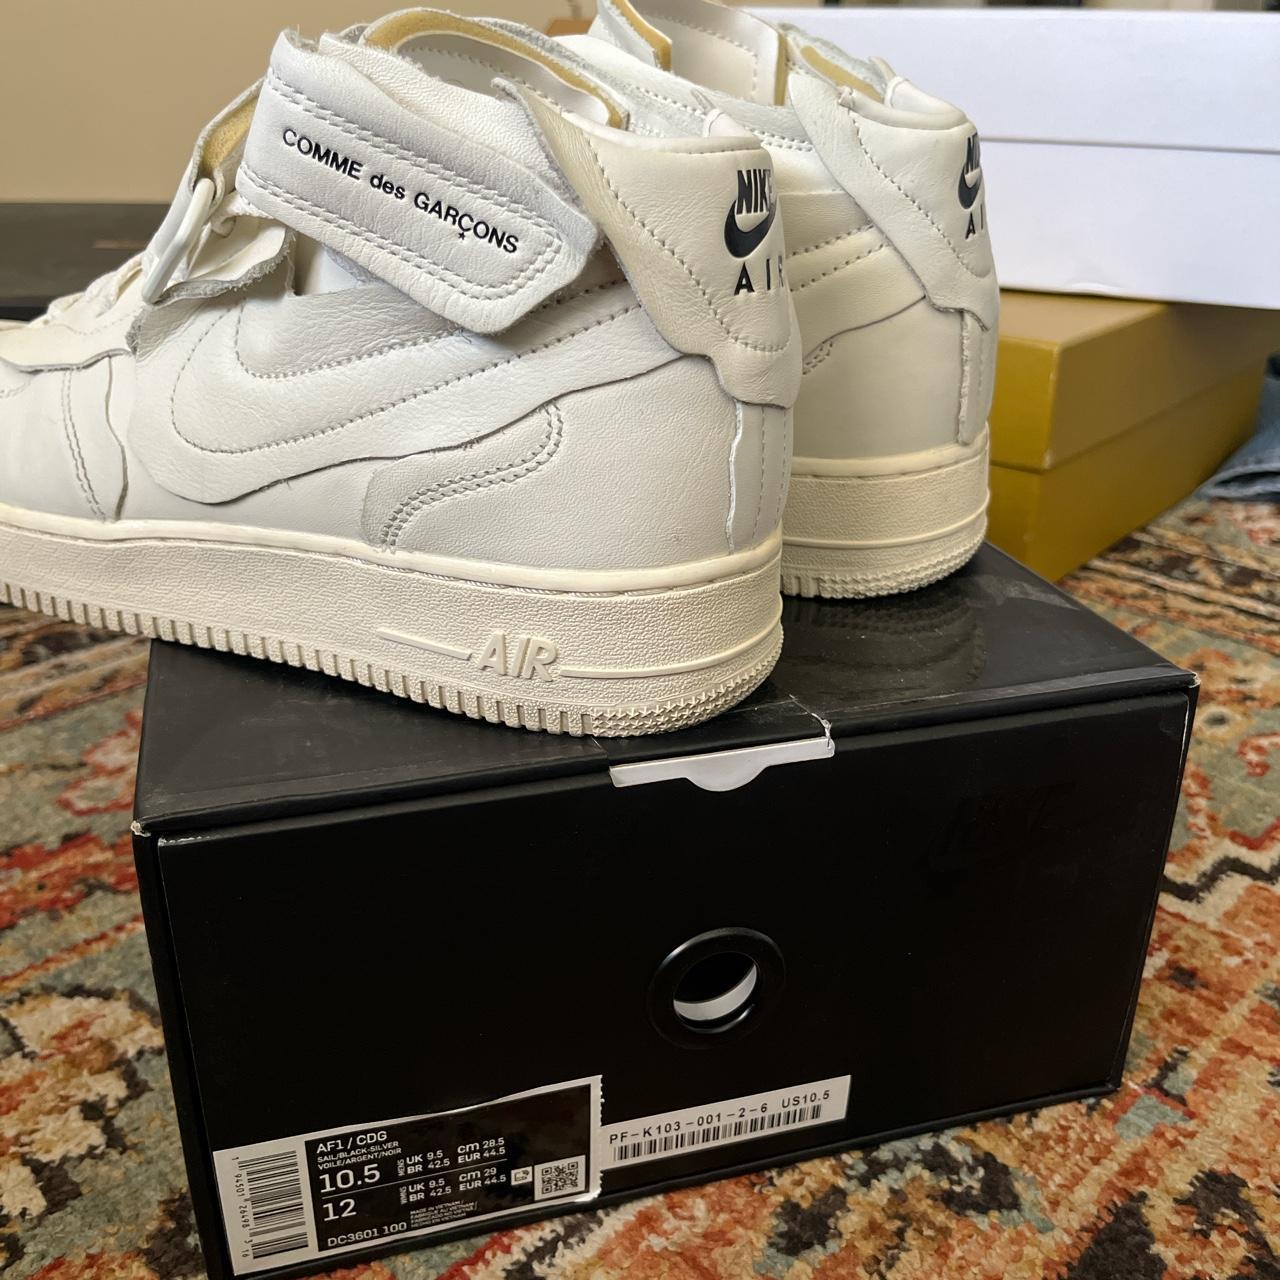 Comme does Garçons / Nike Air Force 1 mid , Buttery...